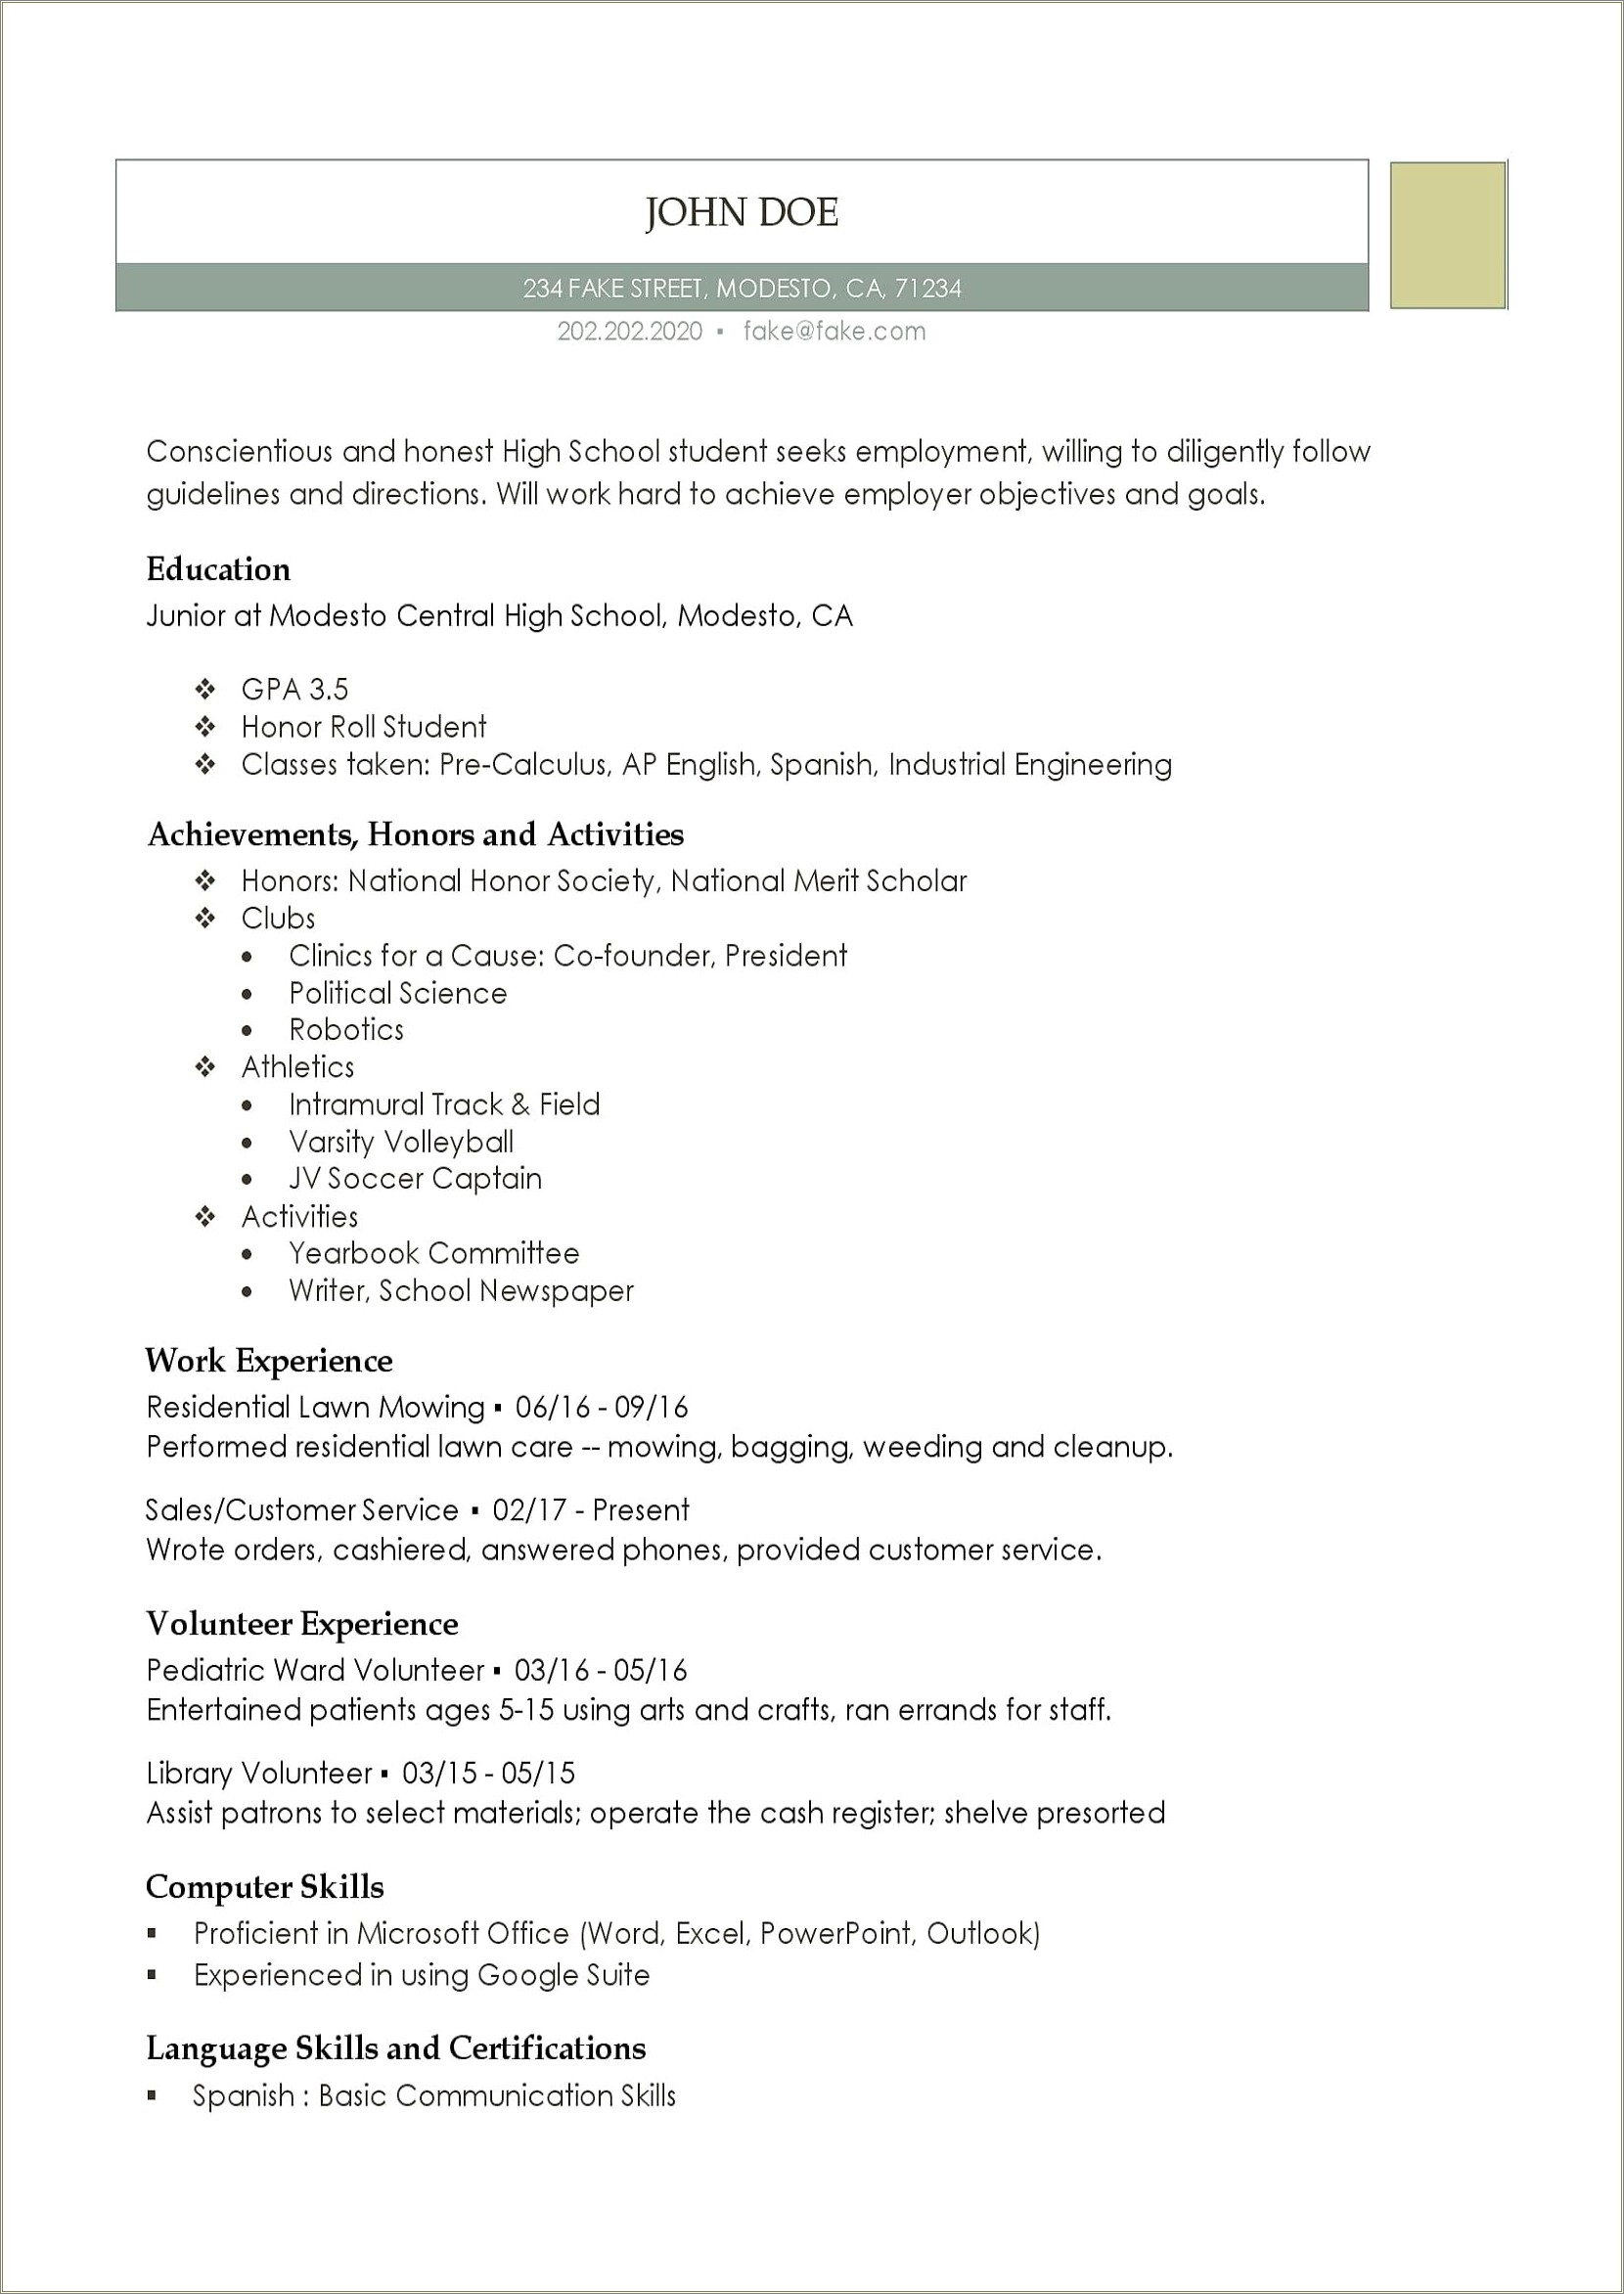 Resume For High School Student Gear Up